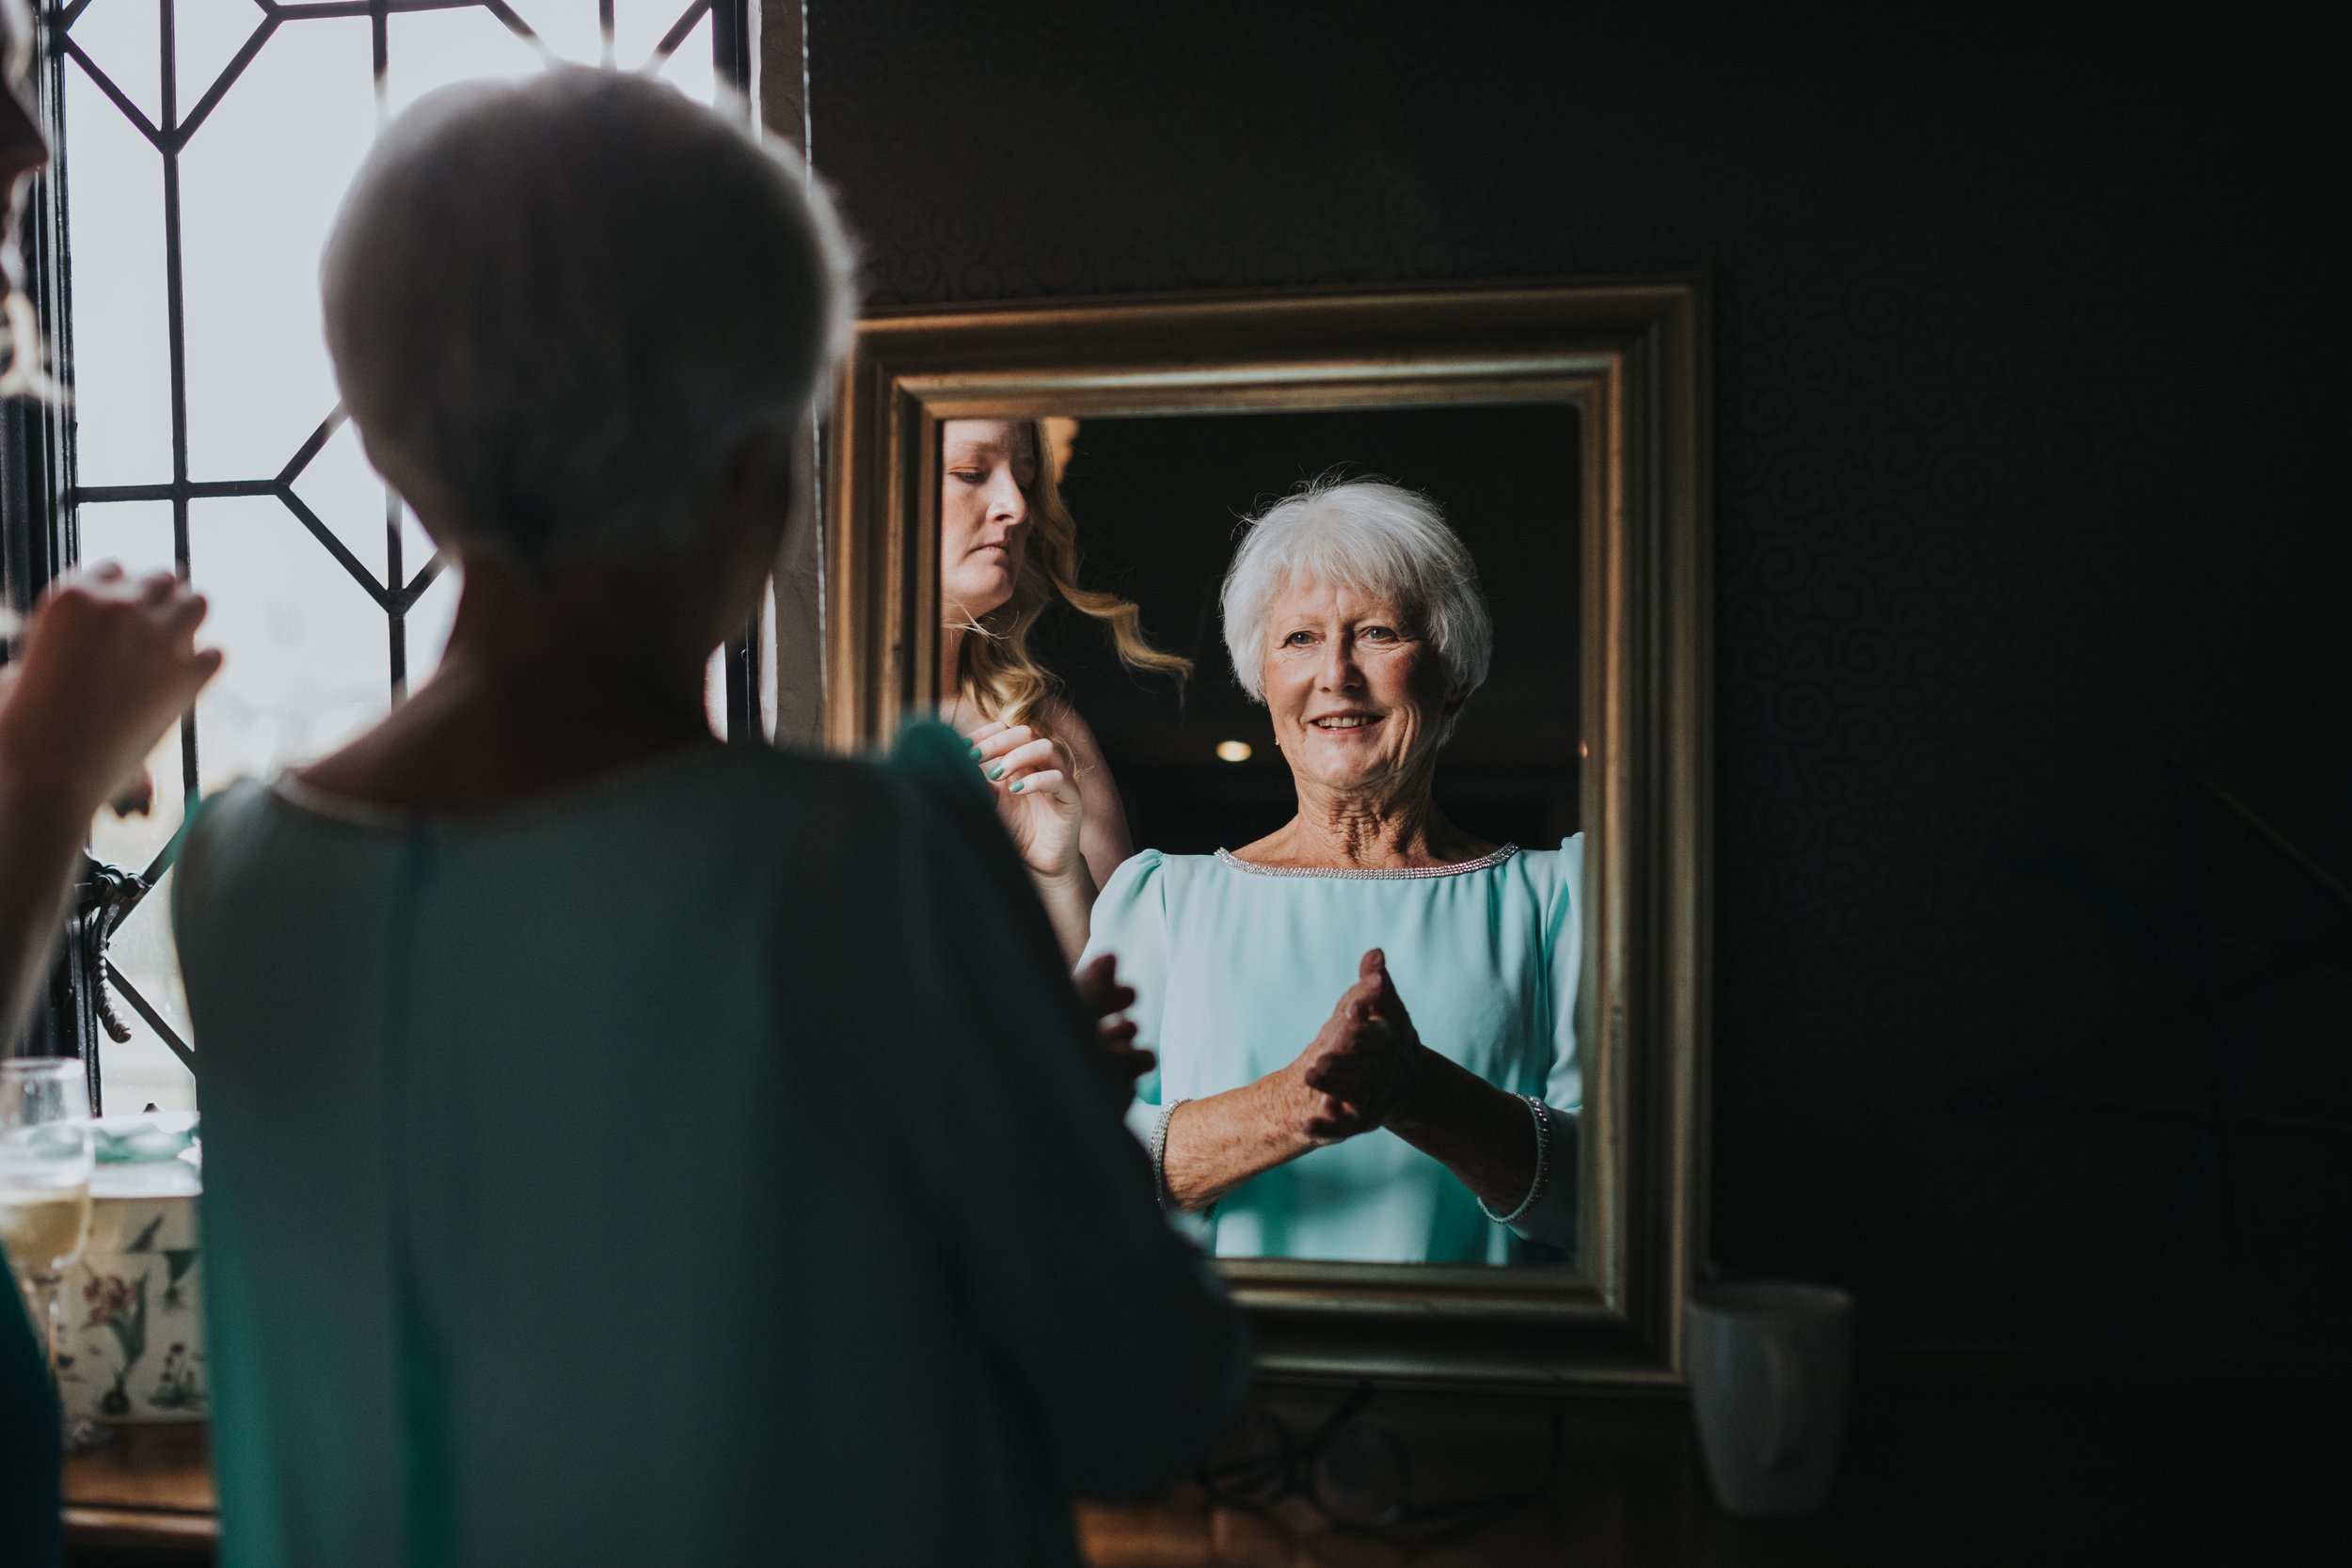 Mother of the Bride smiles as she looks in the mirror